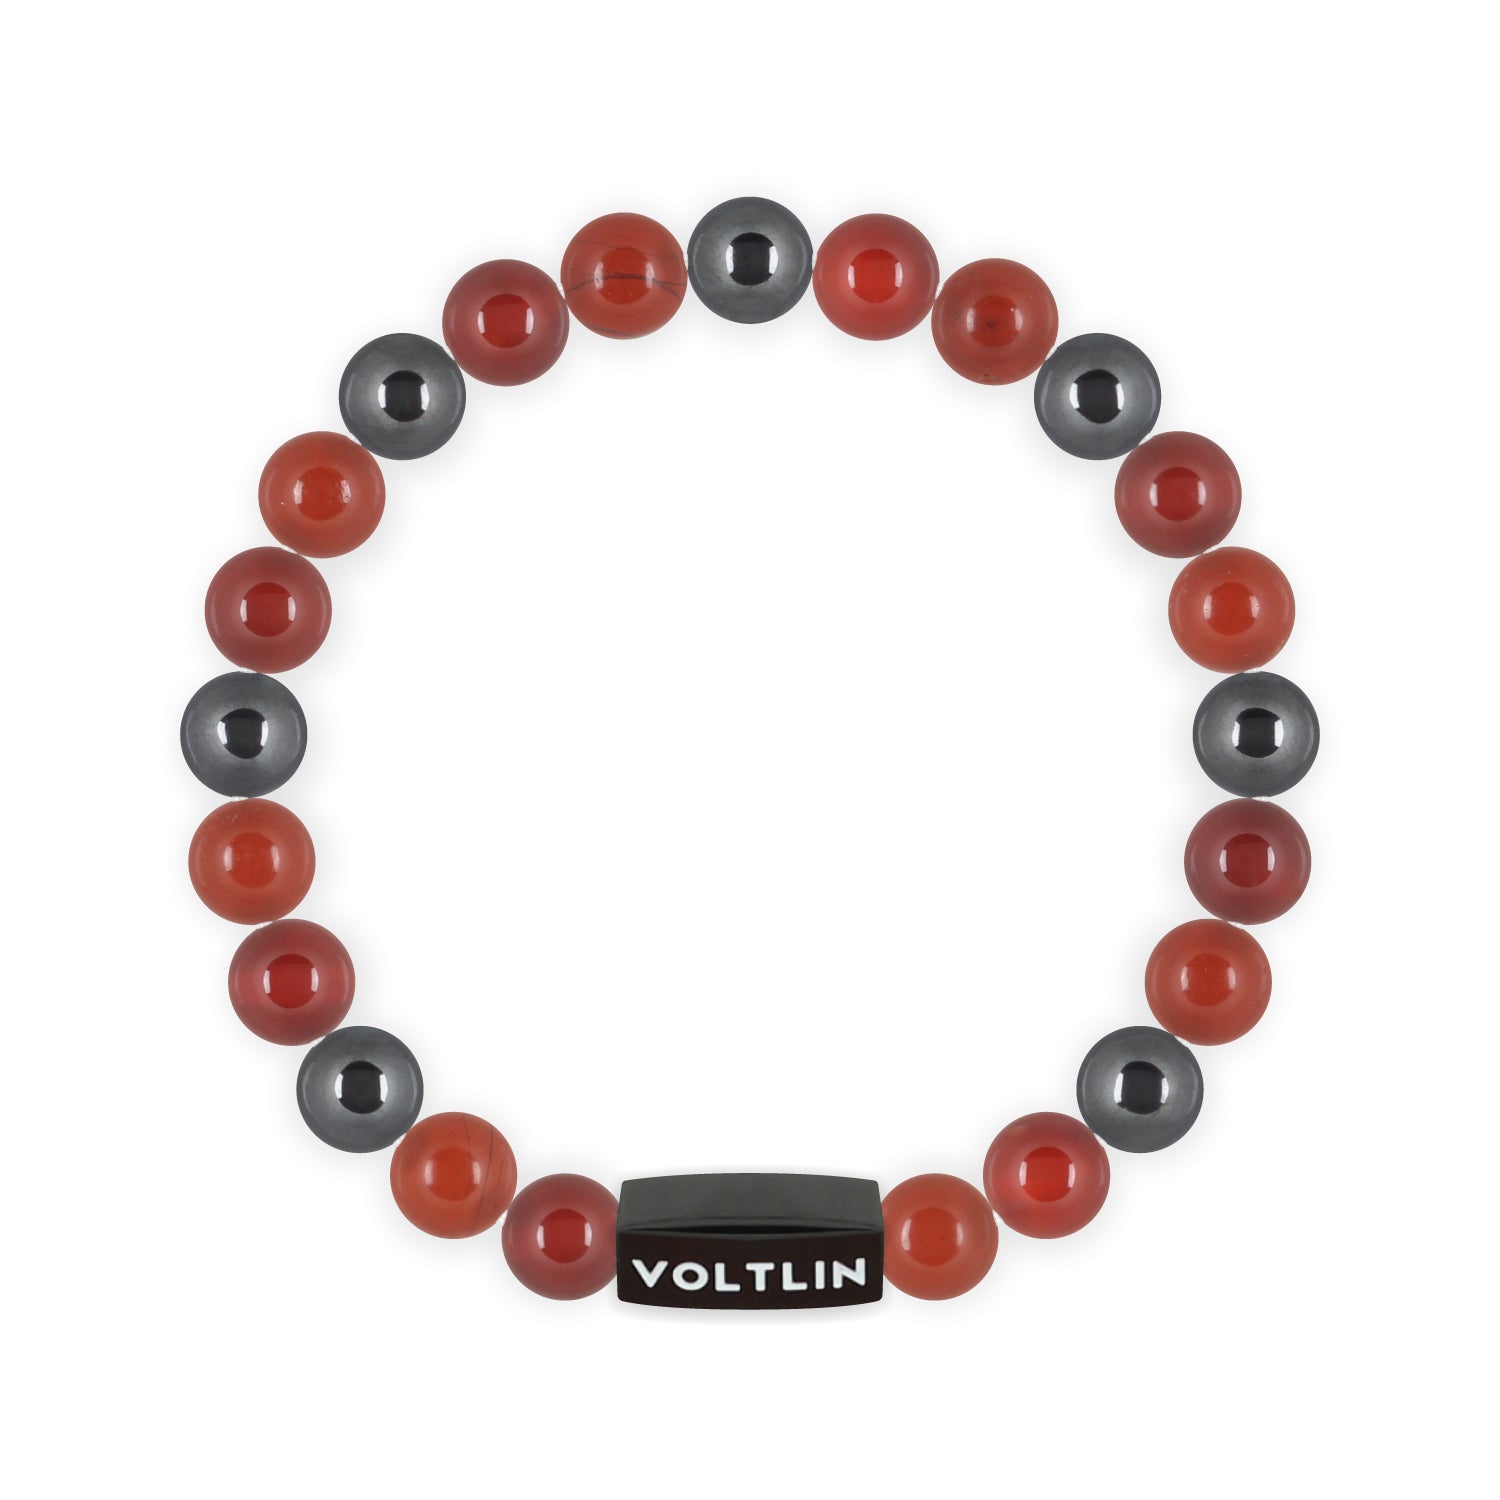 Front view of an 8mm Aries Zodiac crystal beaded stretch bracelet with black stainless steel logo bead made by Voltlin